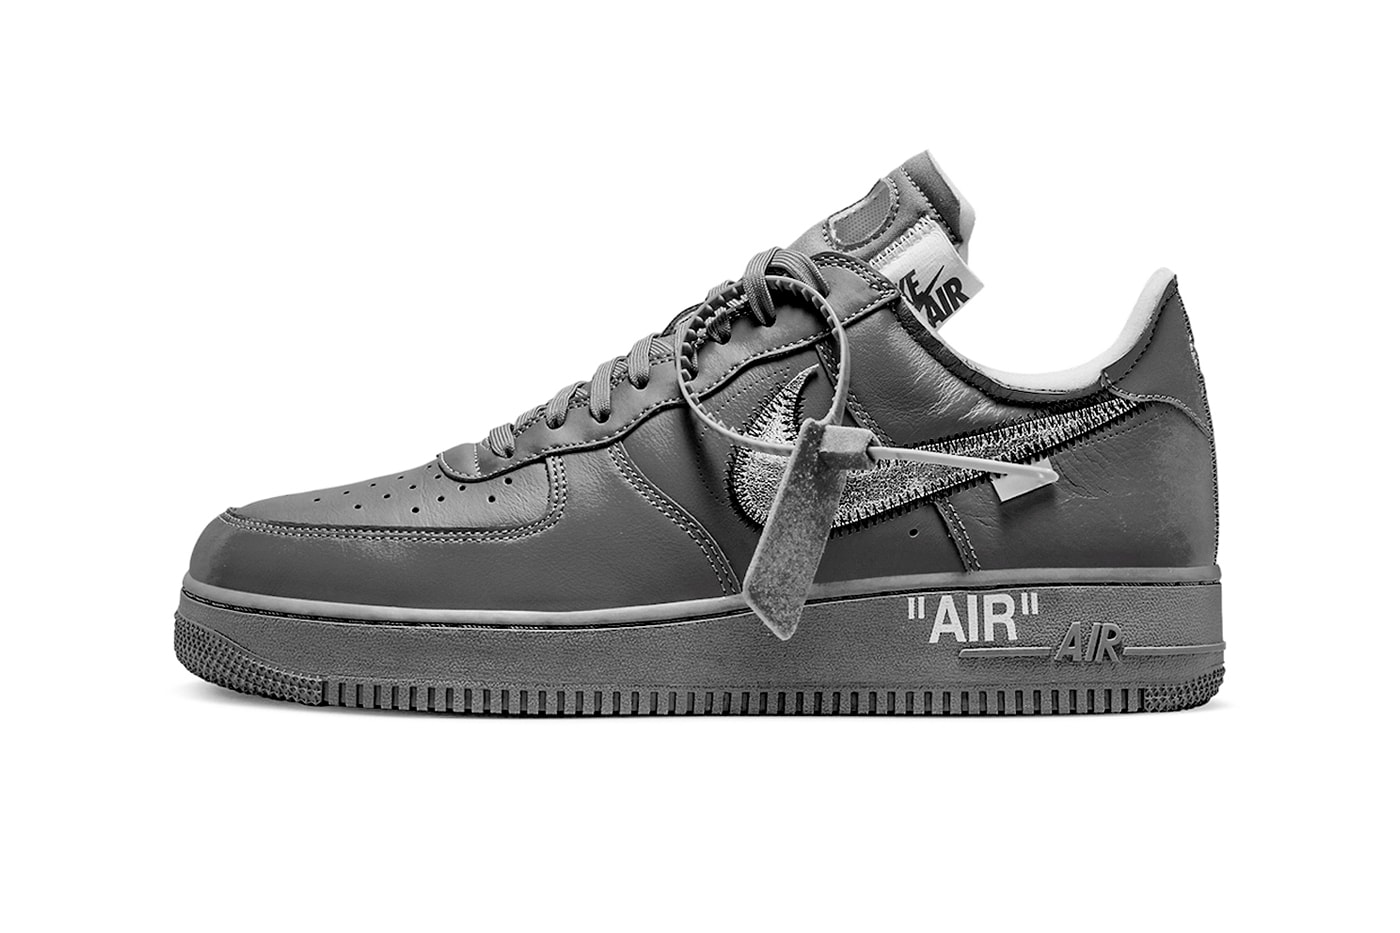 off white nike air force 1 low grey Virgil Abloh release info date price 2022 paris exclusive leather ziptie